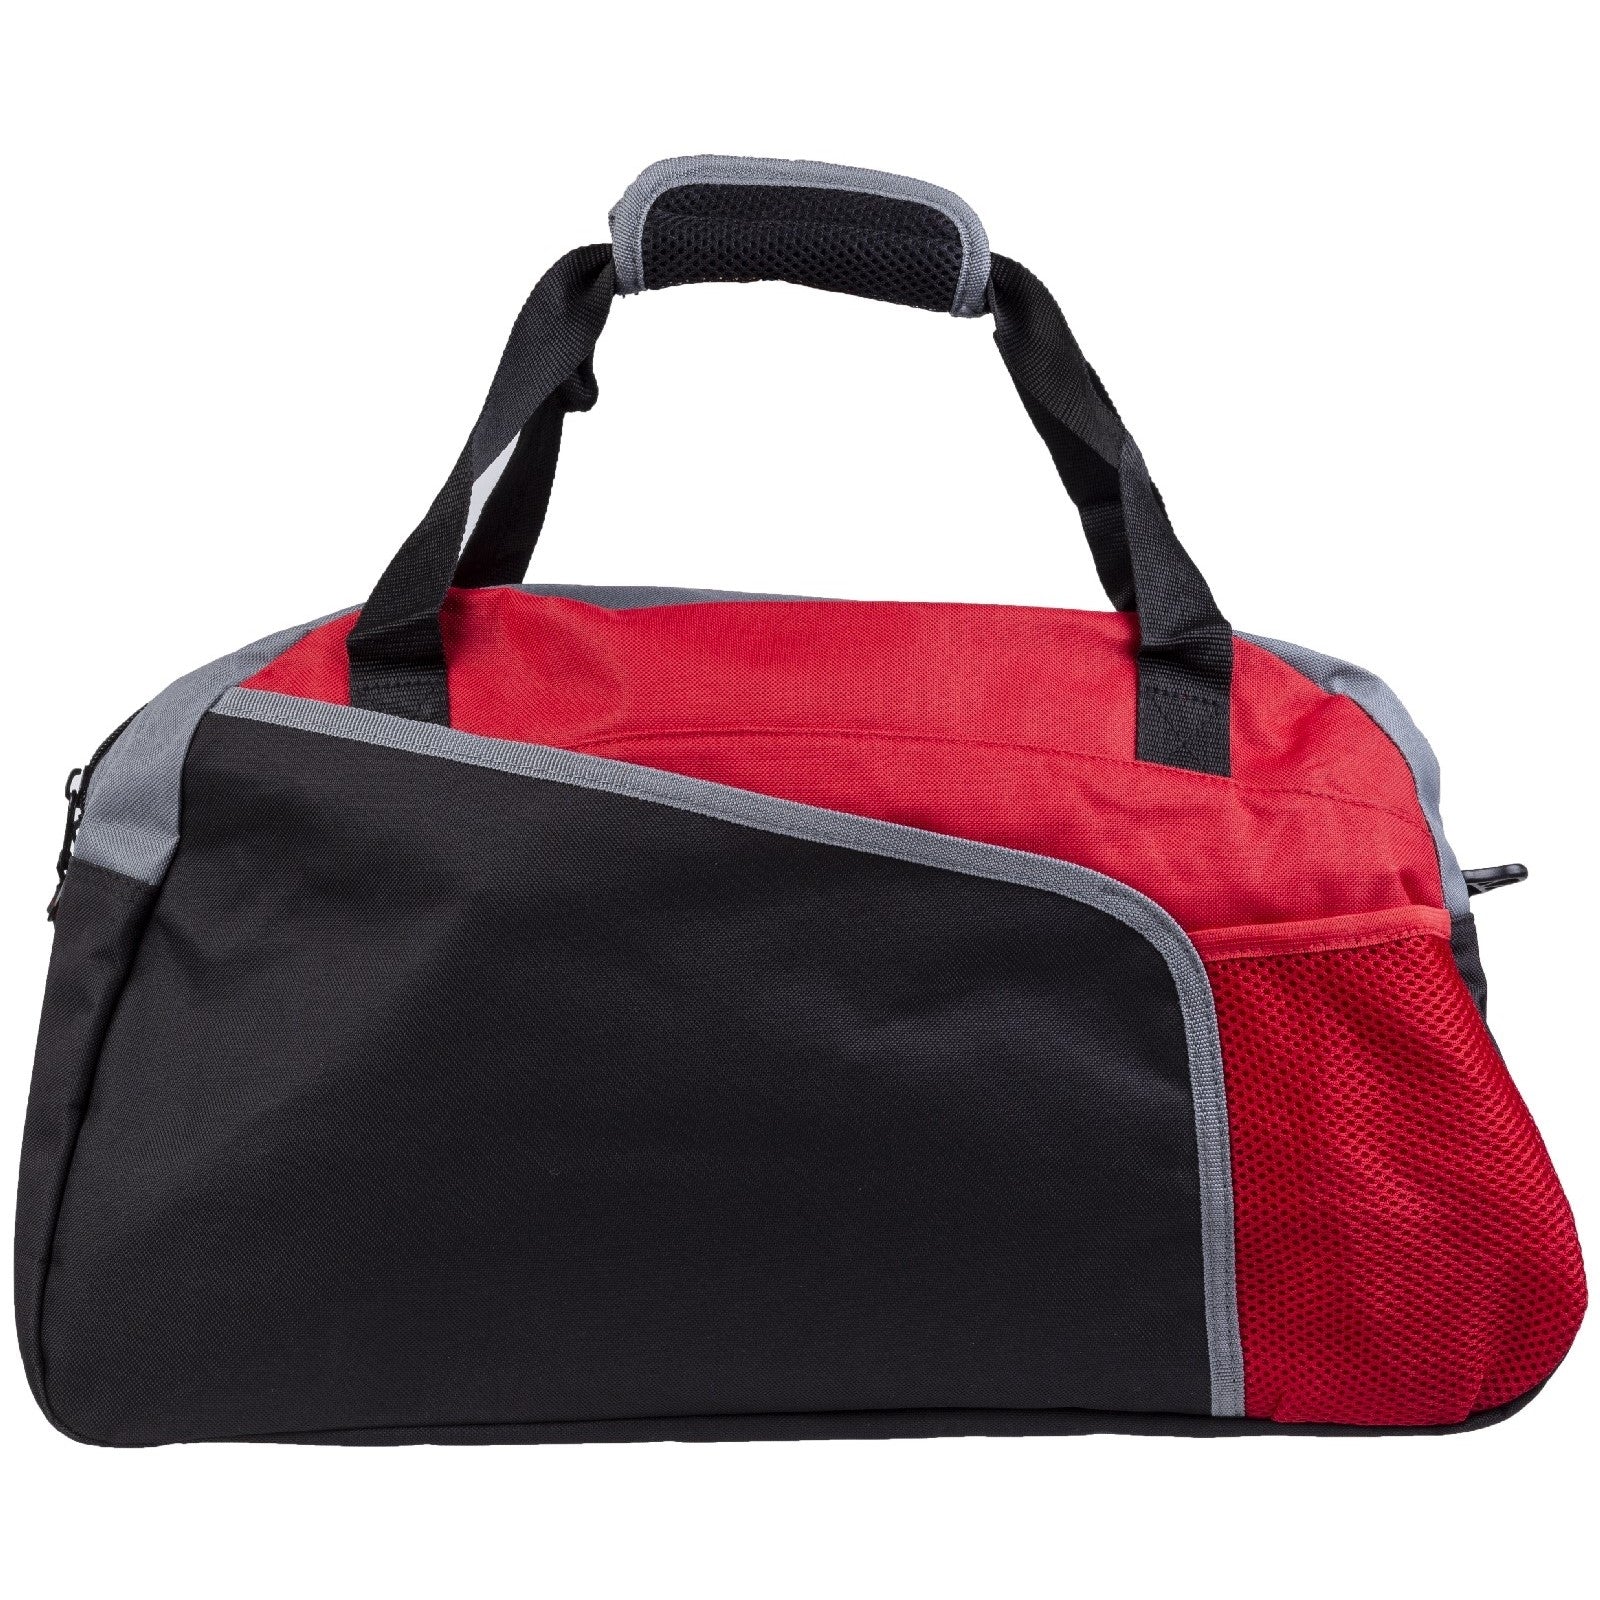 Miscellaneous Other SH1584 Saloniki Holdall Bag